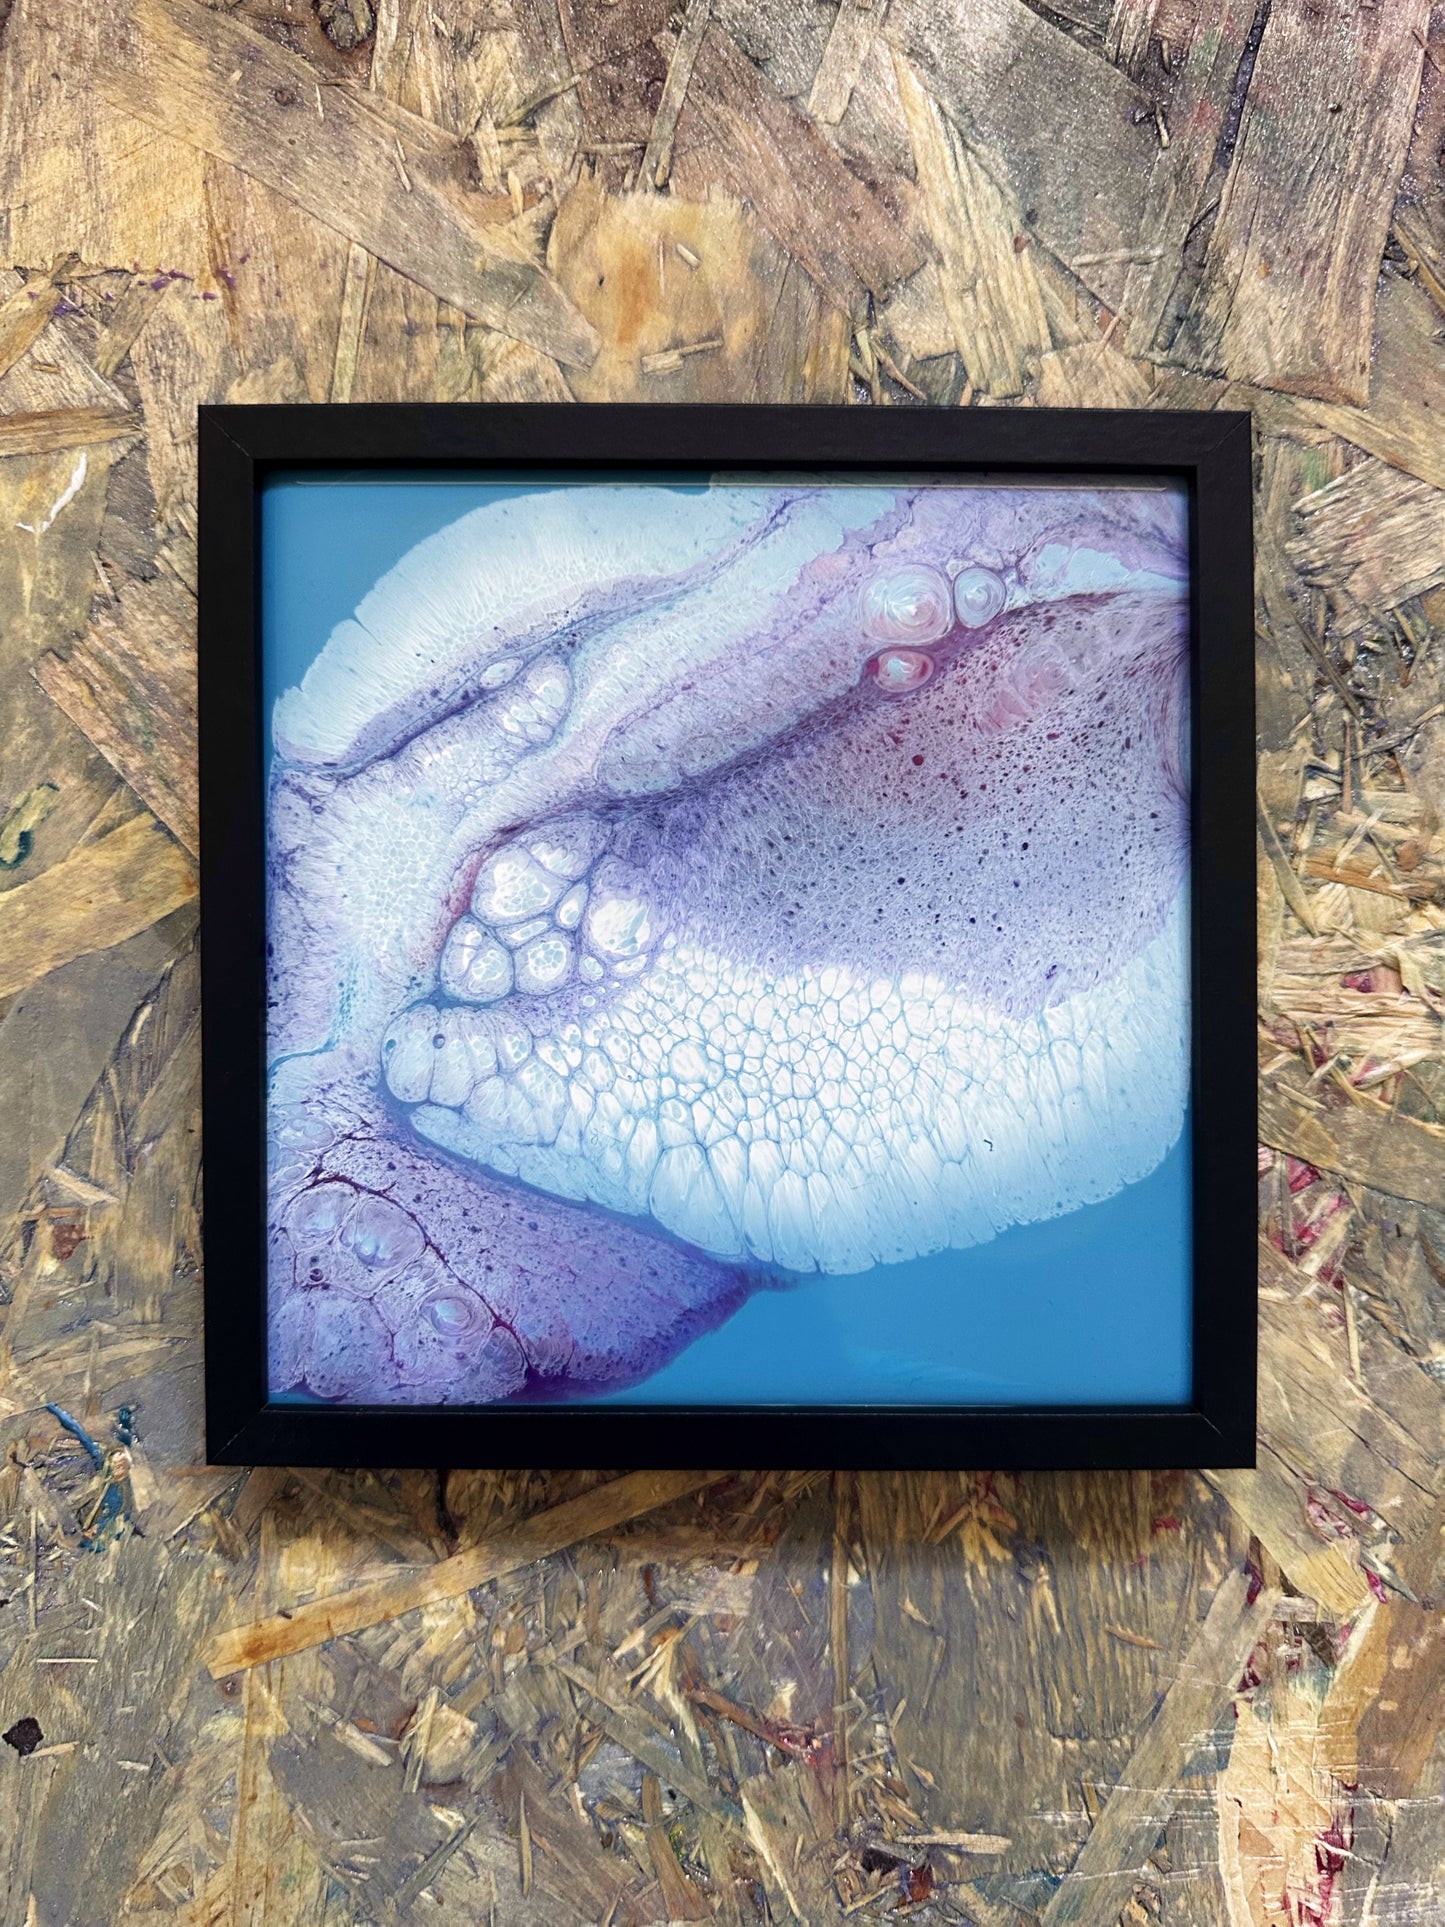 Epoxy Resin Abstract Artwork Painted On Ceramic Tile